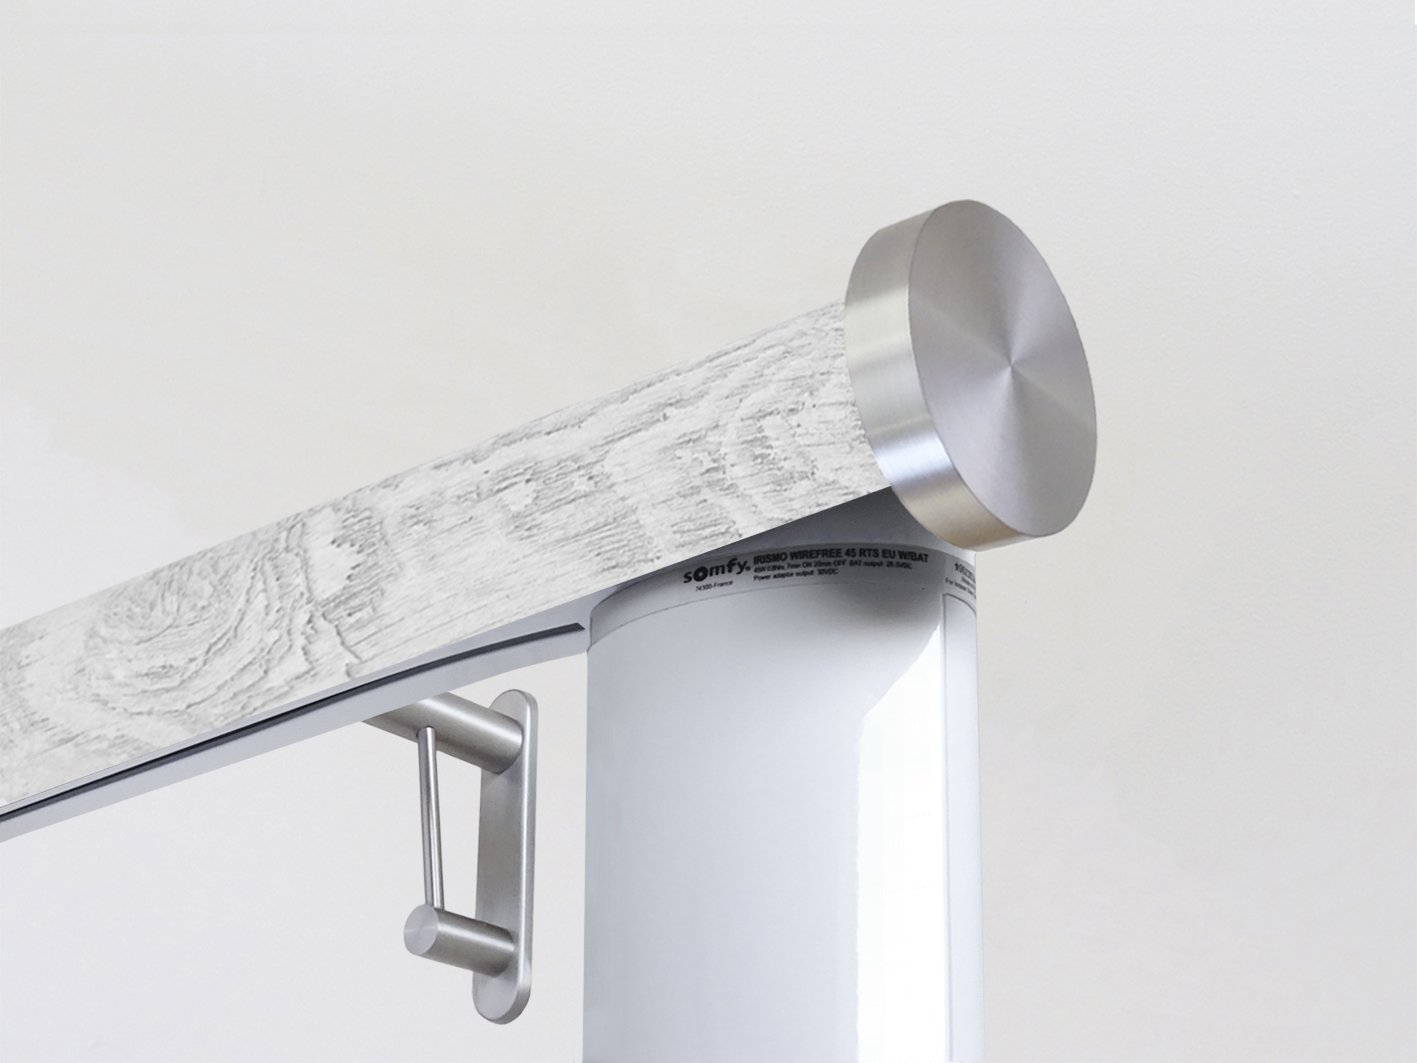 Motorised electric curtain pole in nordic white driftwood, wireless & battery powered using the Somfy Glydea track | Walcot House UK curtain pole specialists